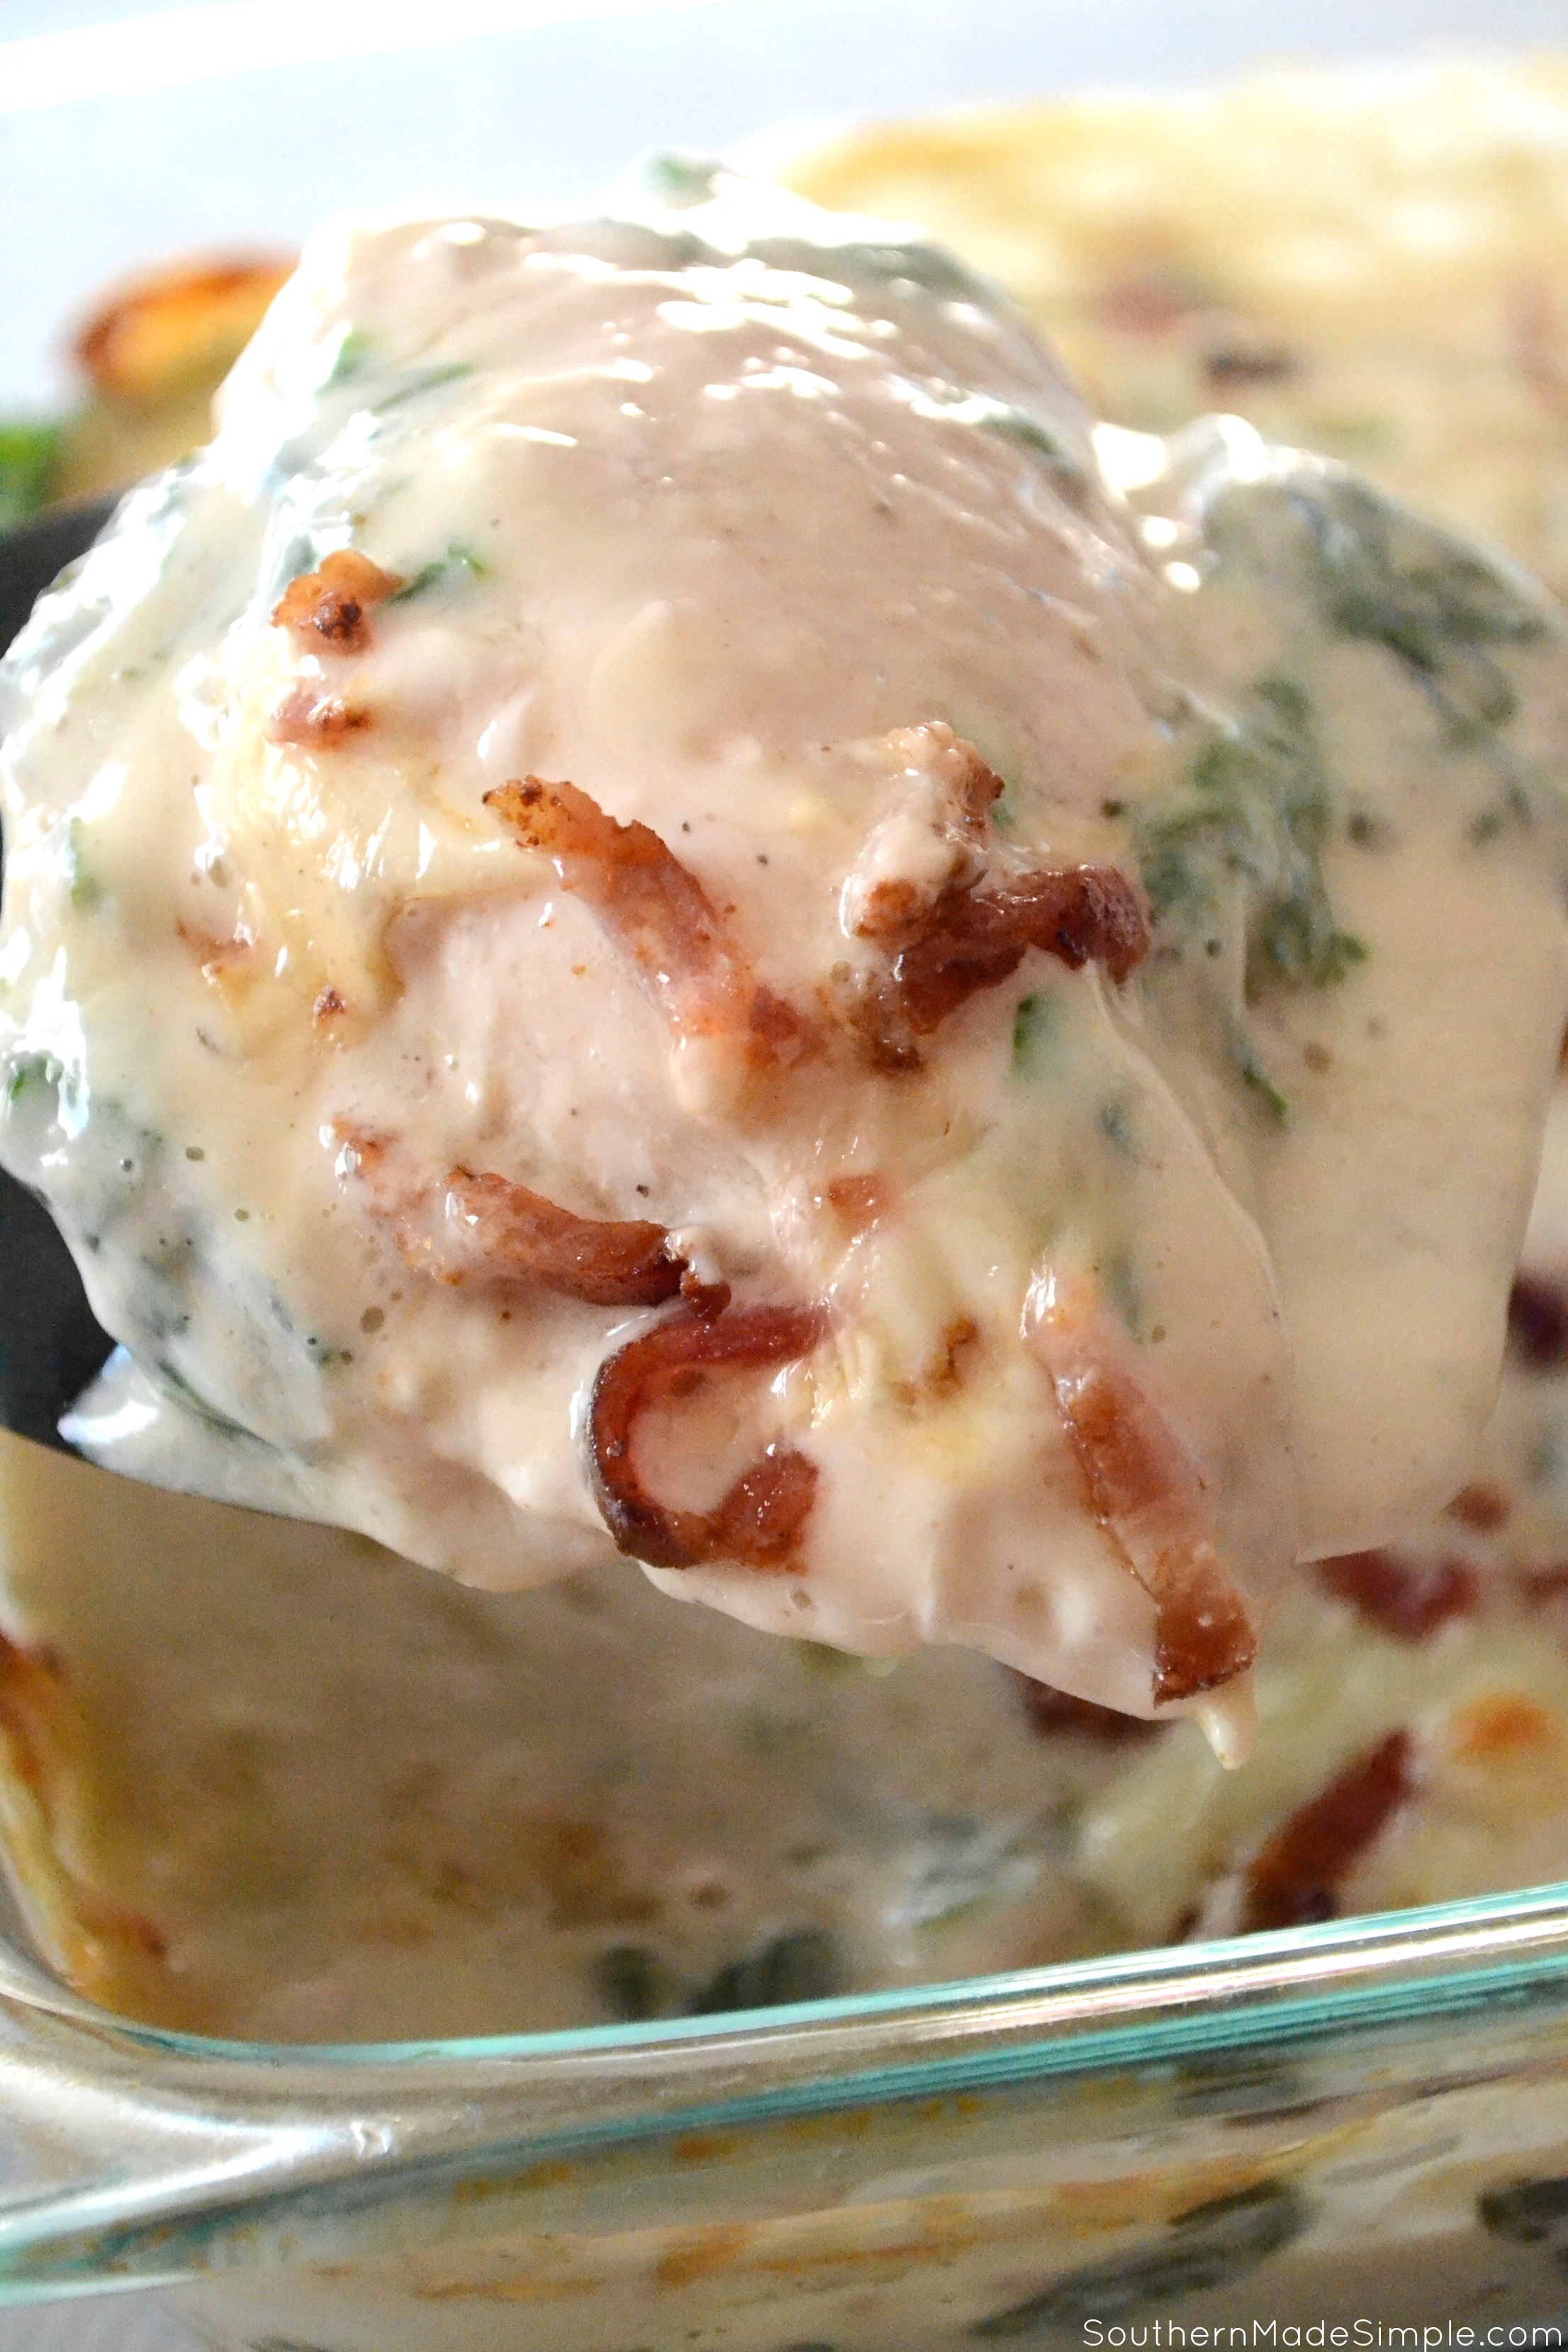 There's nothing better than a baked potato loaded with delicious cheesy goodness, and these Cheesy Chicken & Spinach Alfredo Baked Potatoes are overflowing with the the creamiest alfredo sauce made by Ragu that will make you go back for seconds!